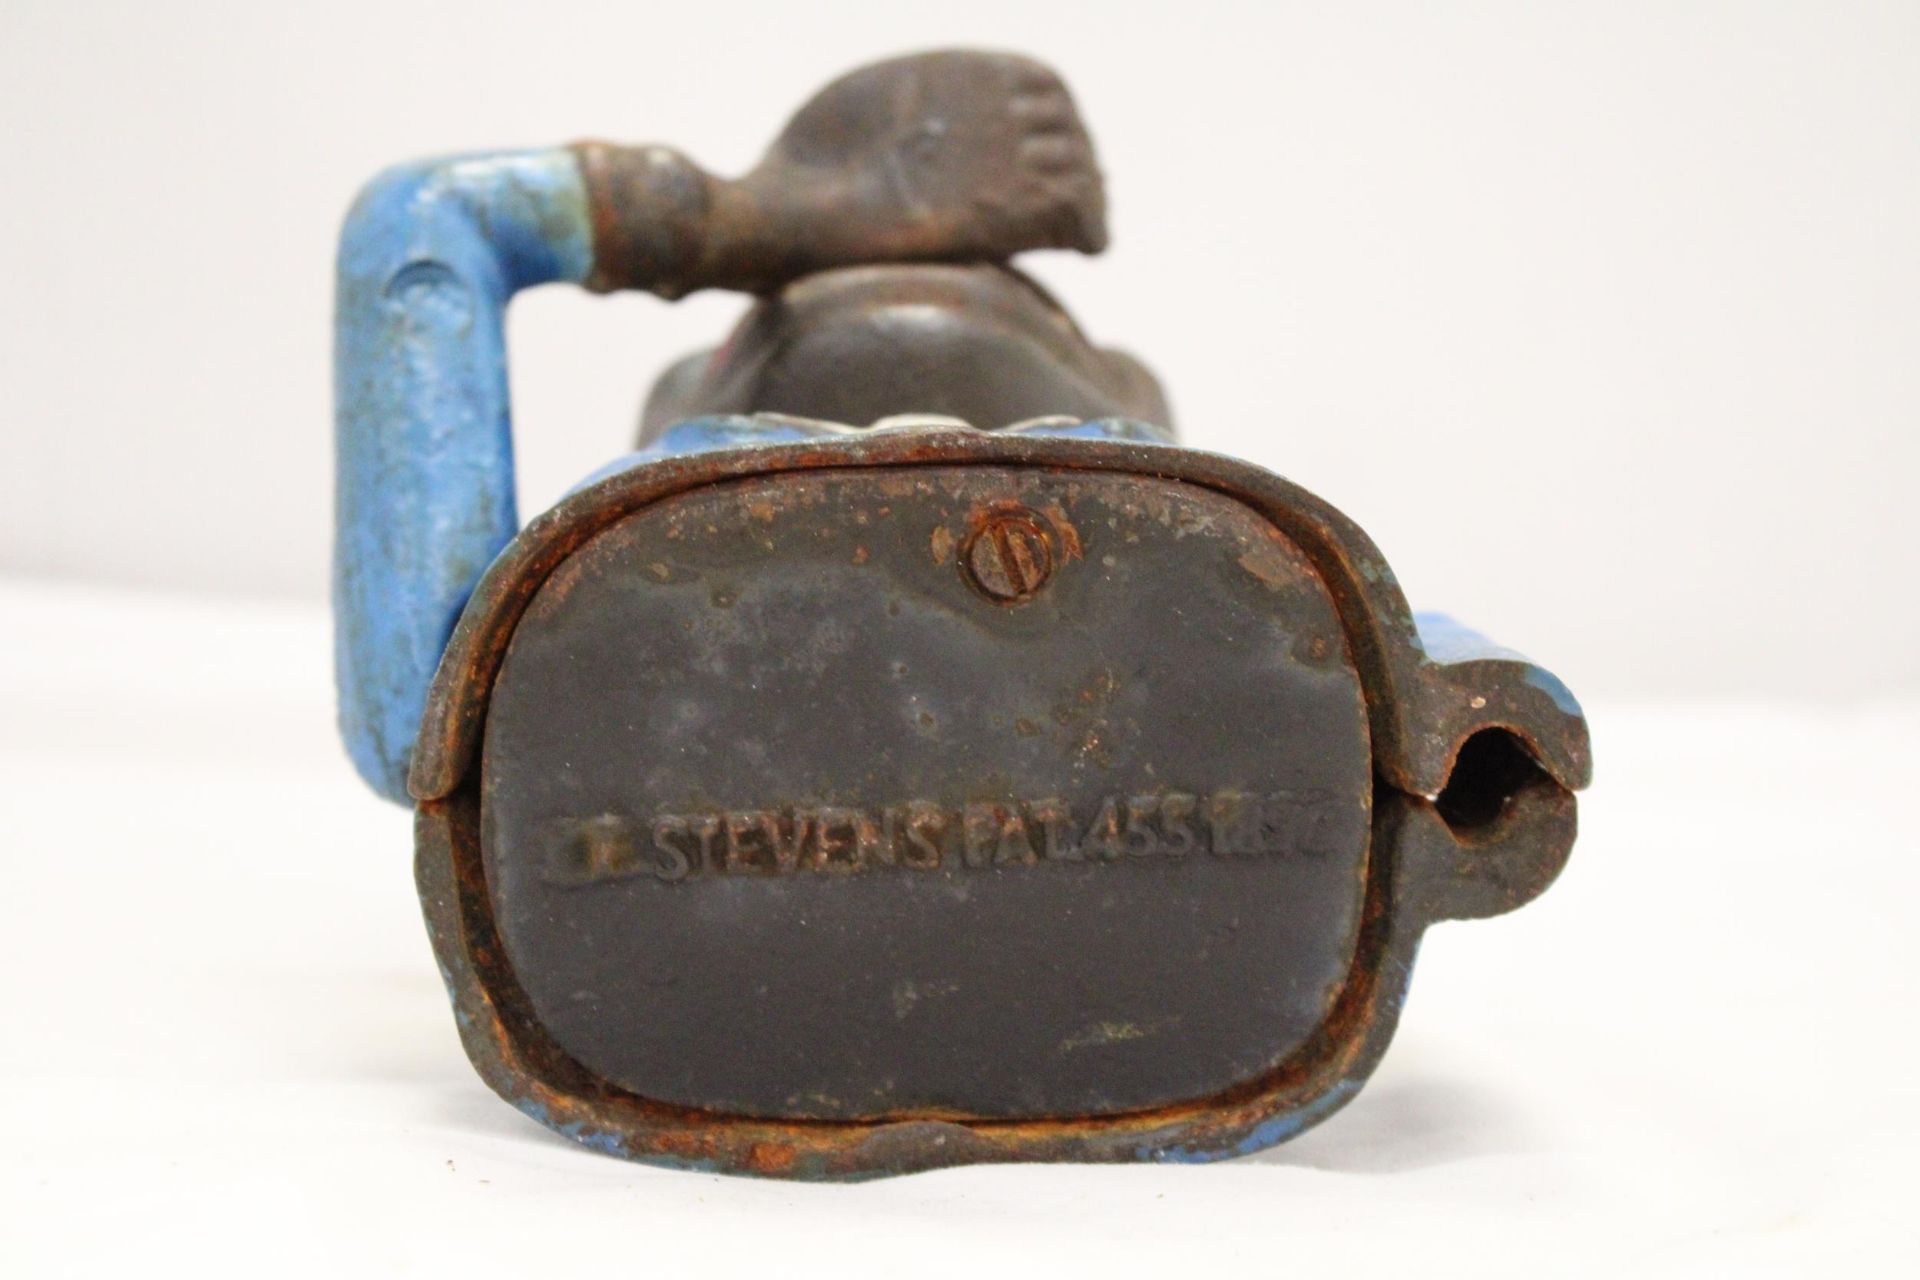 A VINTAGE CAST IRON AFRICAN AMERICAN MECHANICAL BANK - Image 6 of 6